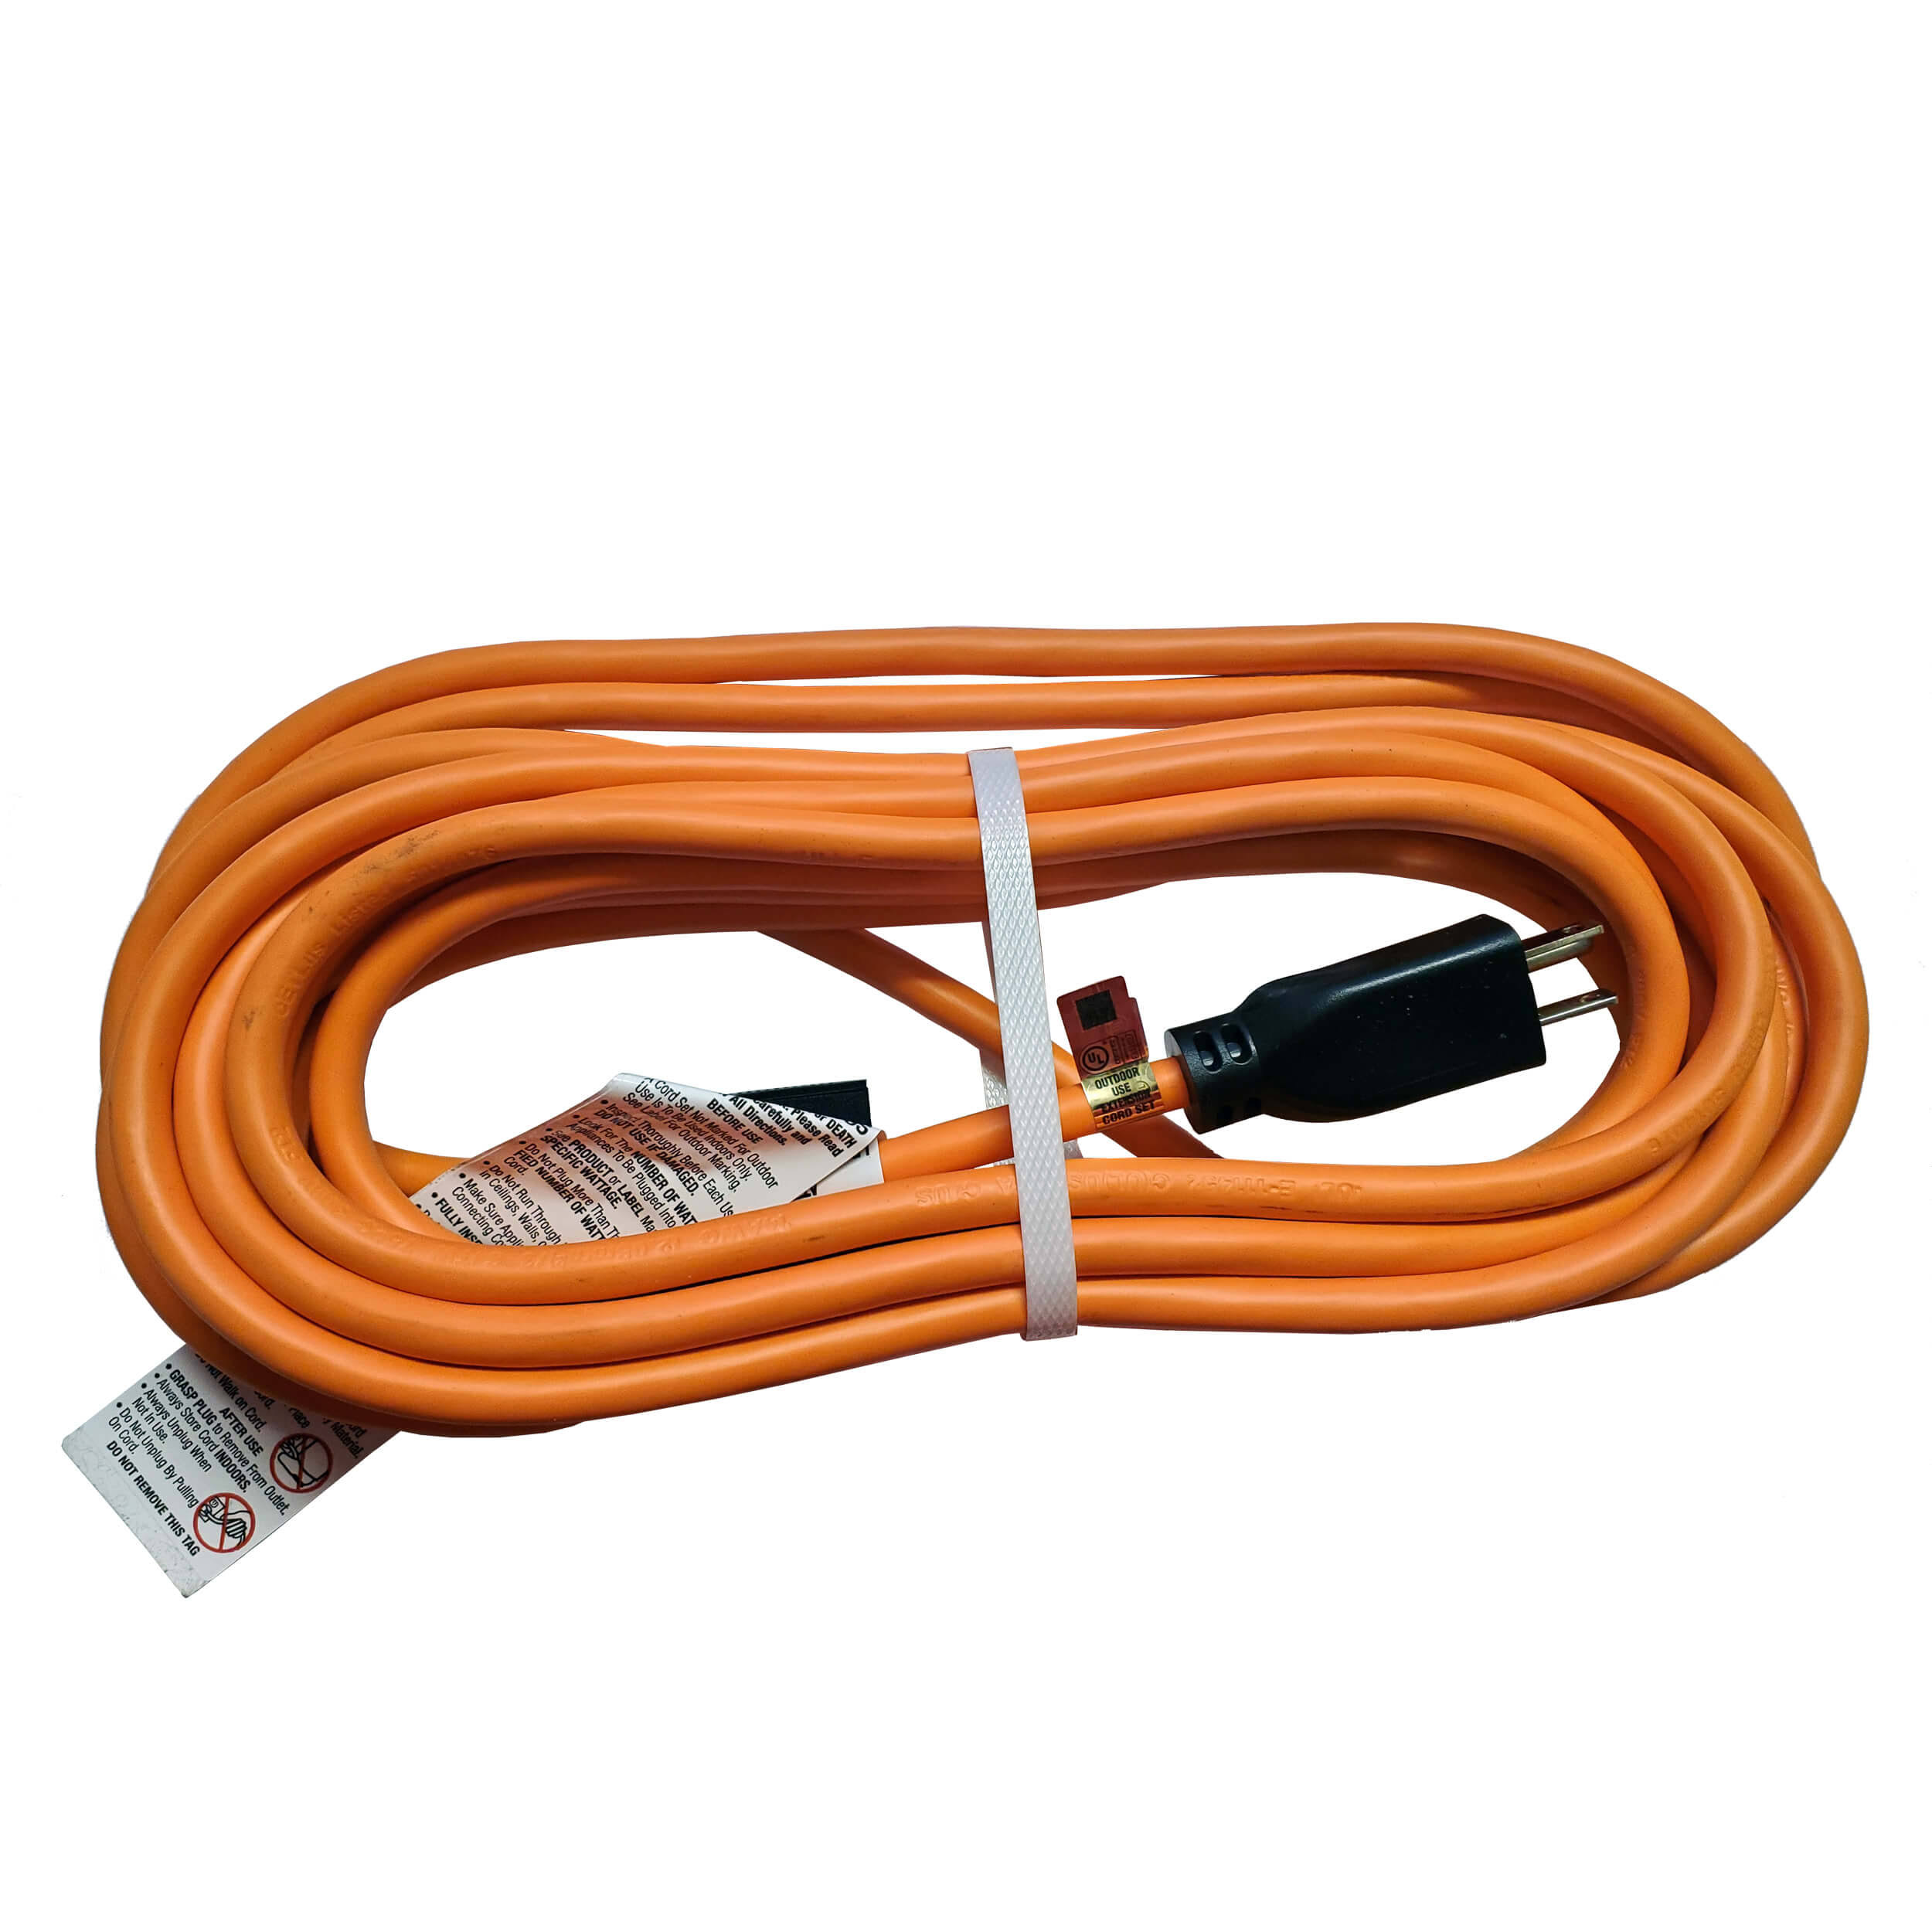 25' Outdoor Extension Cord 14/3 AWG 63025